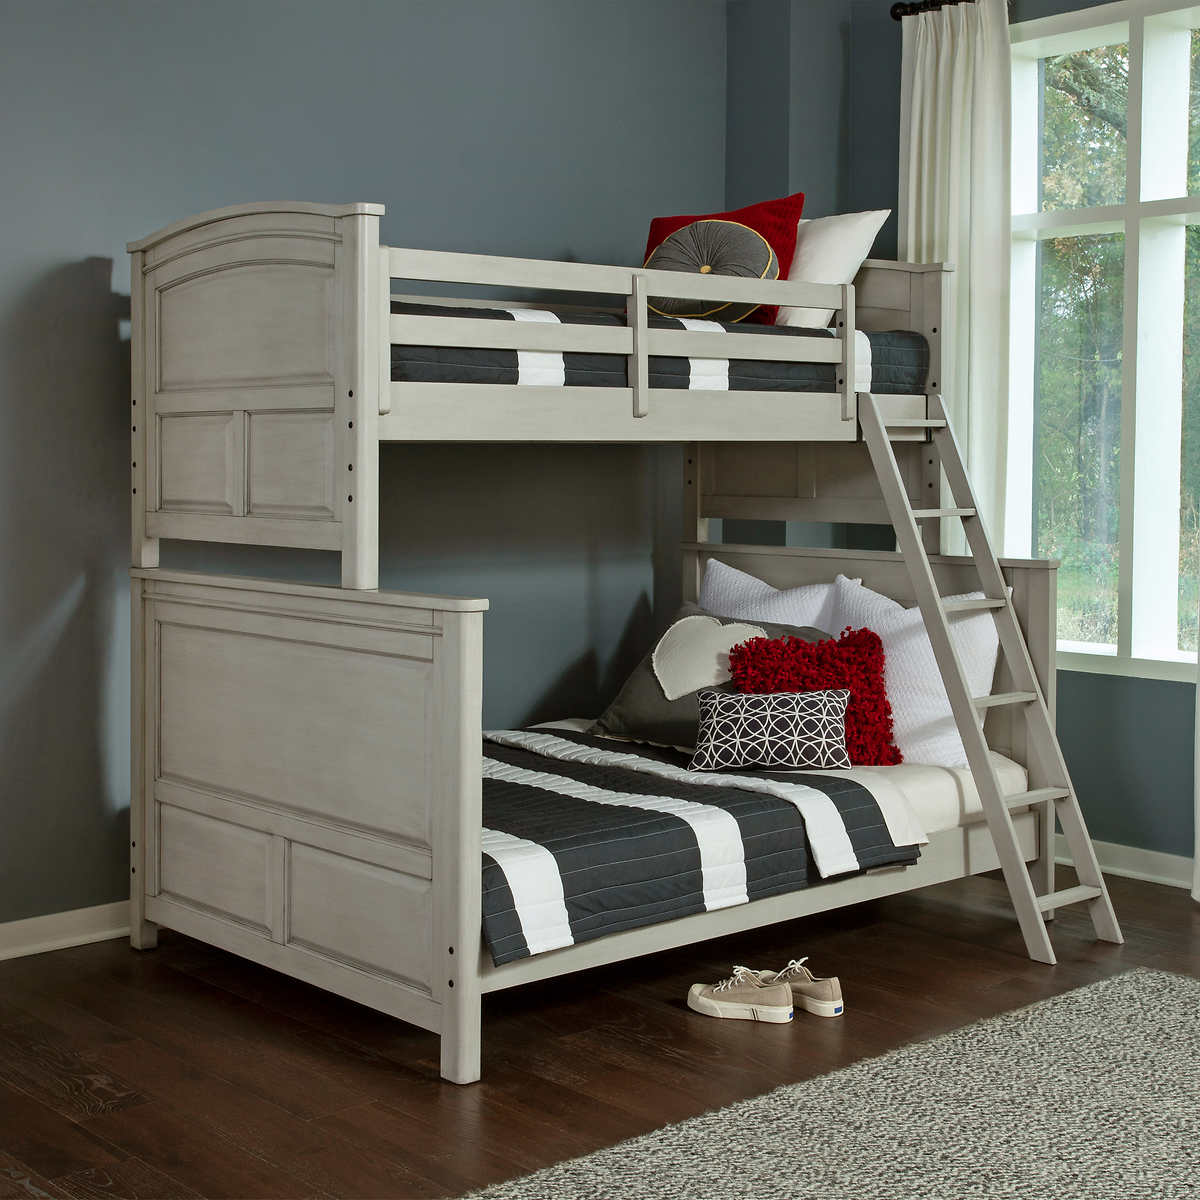 Wingate Twin Over Full Bunk Bed Costco, Full Bottom Twin Top Bunk Bed